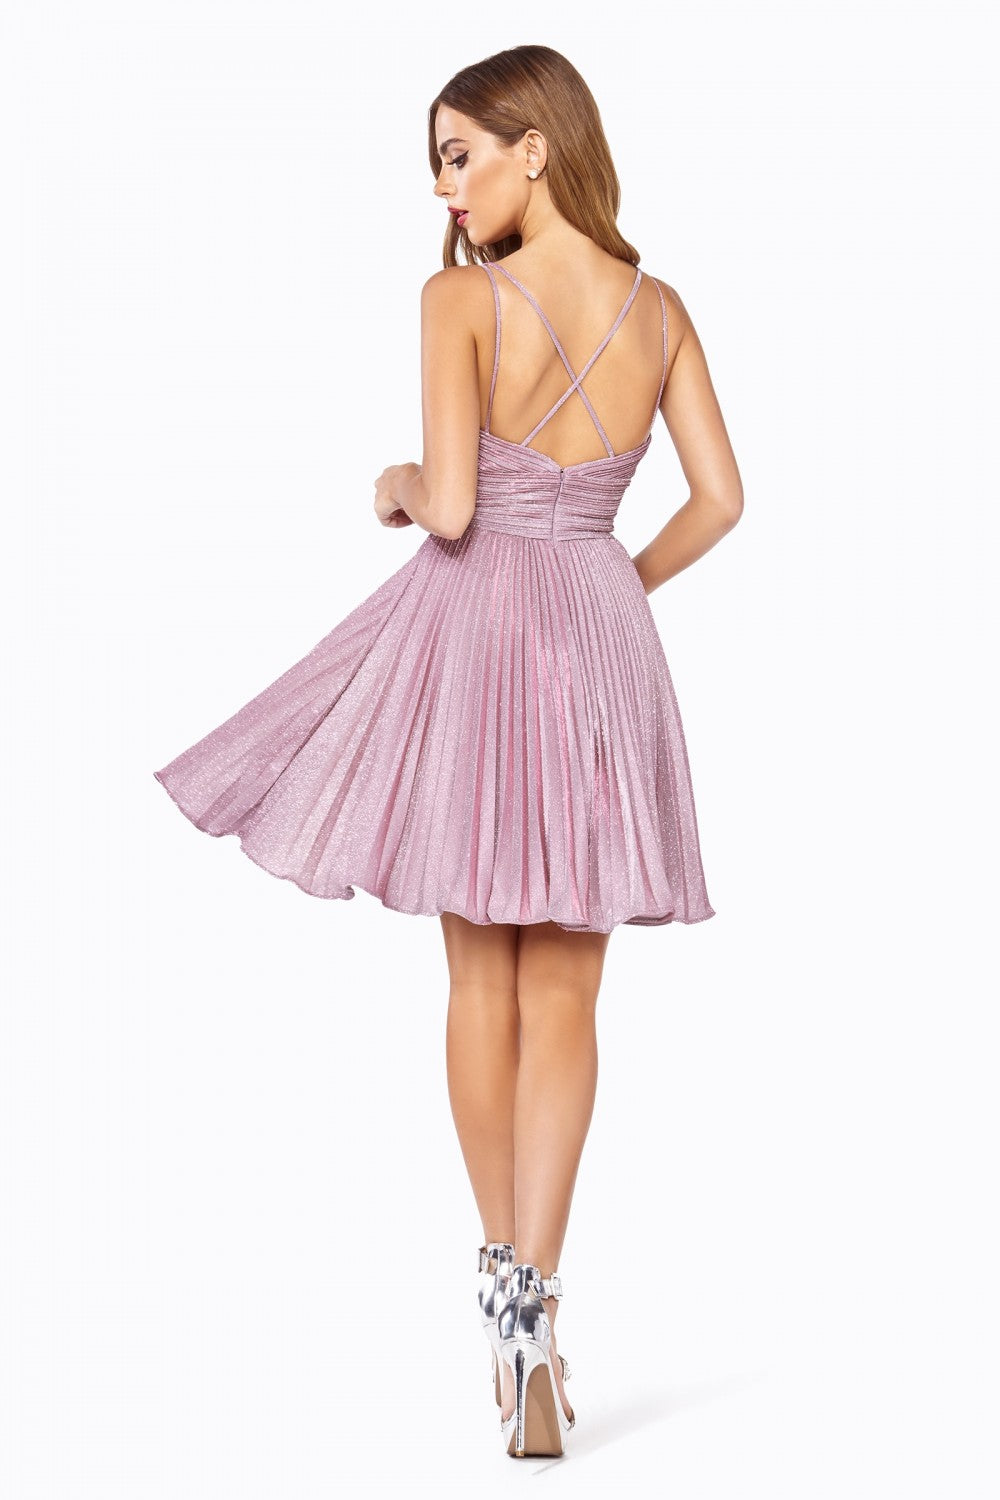 A-line Short Dress Pleated Cocktail Mini Gown Glittery Prom Dresses Backless Criss Cross Back CDAM391 Elsy Style Cocktail Dress